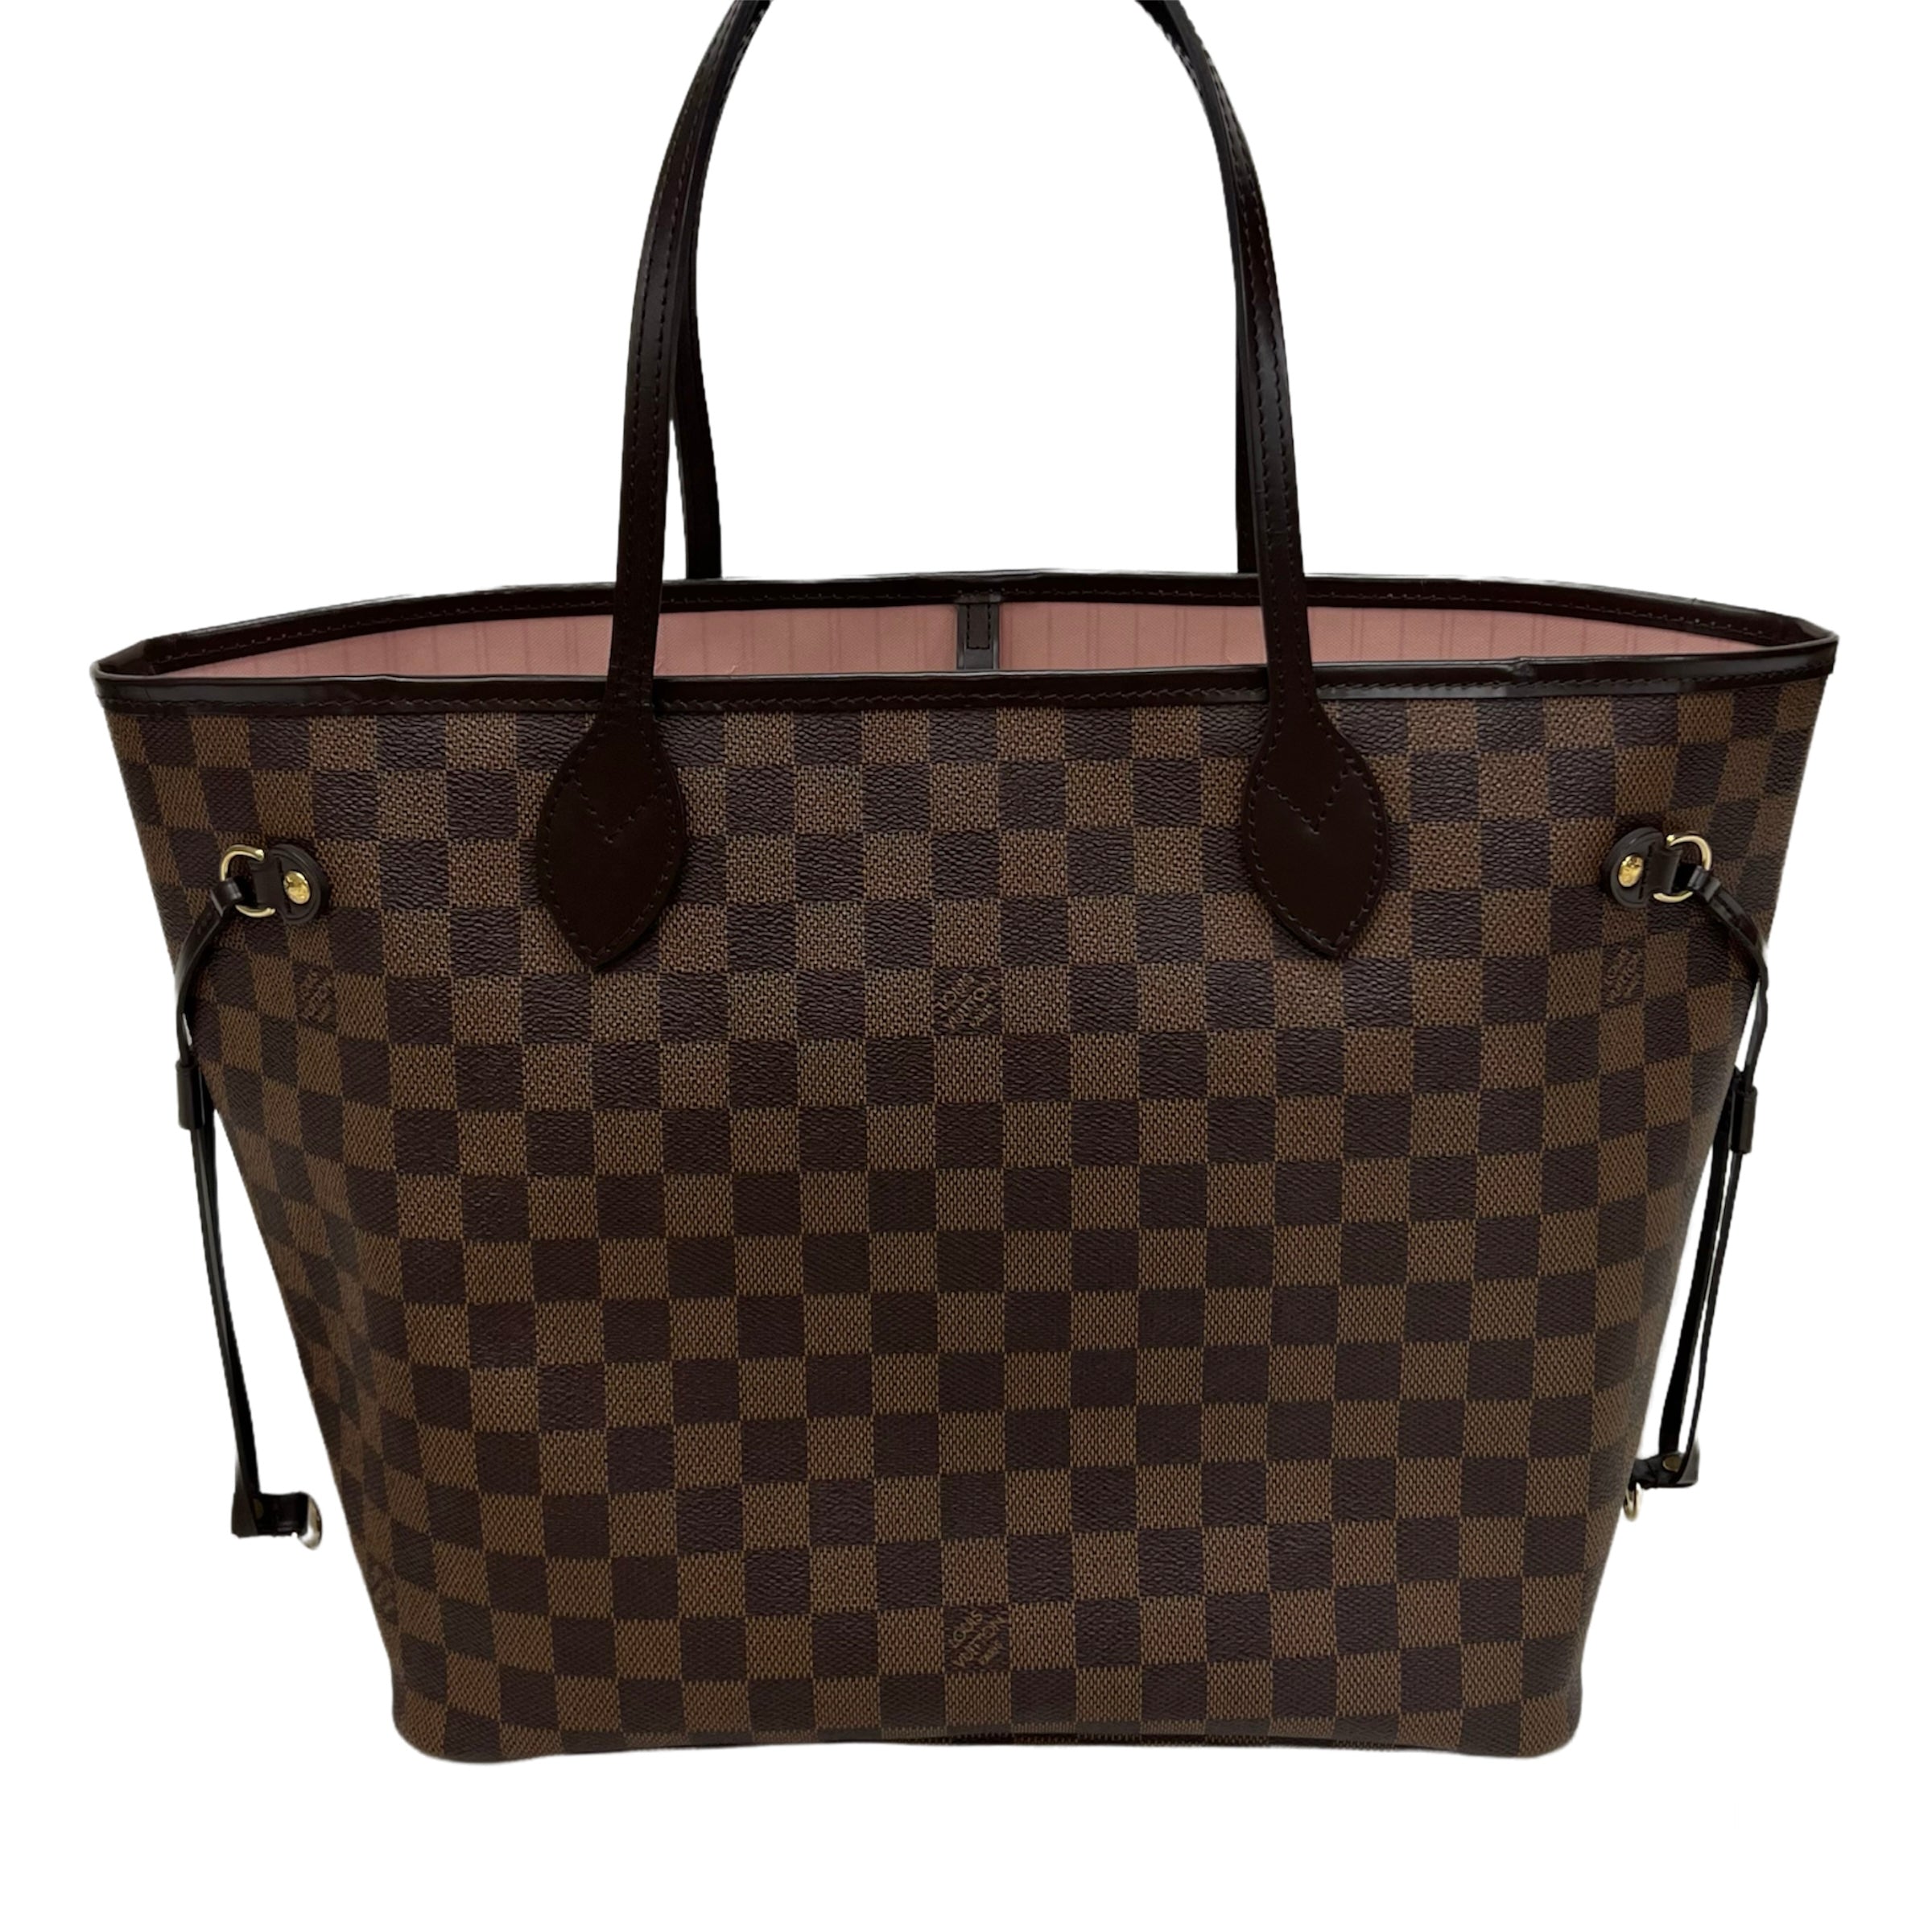 Louis Vuitton Handbags and Wallets – J'Adore Wakefield